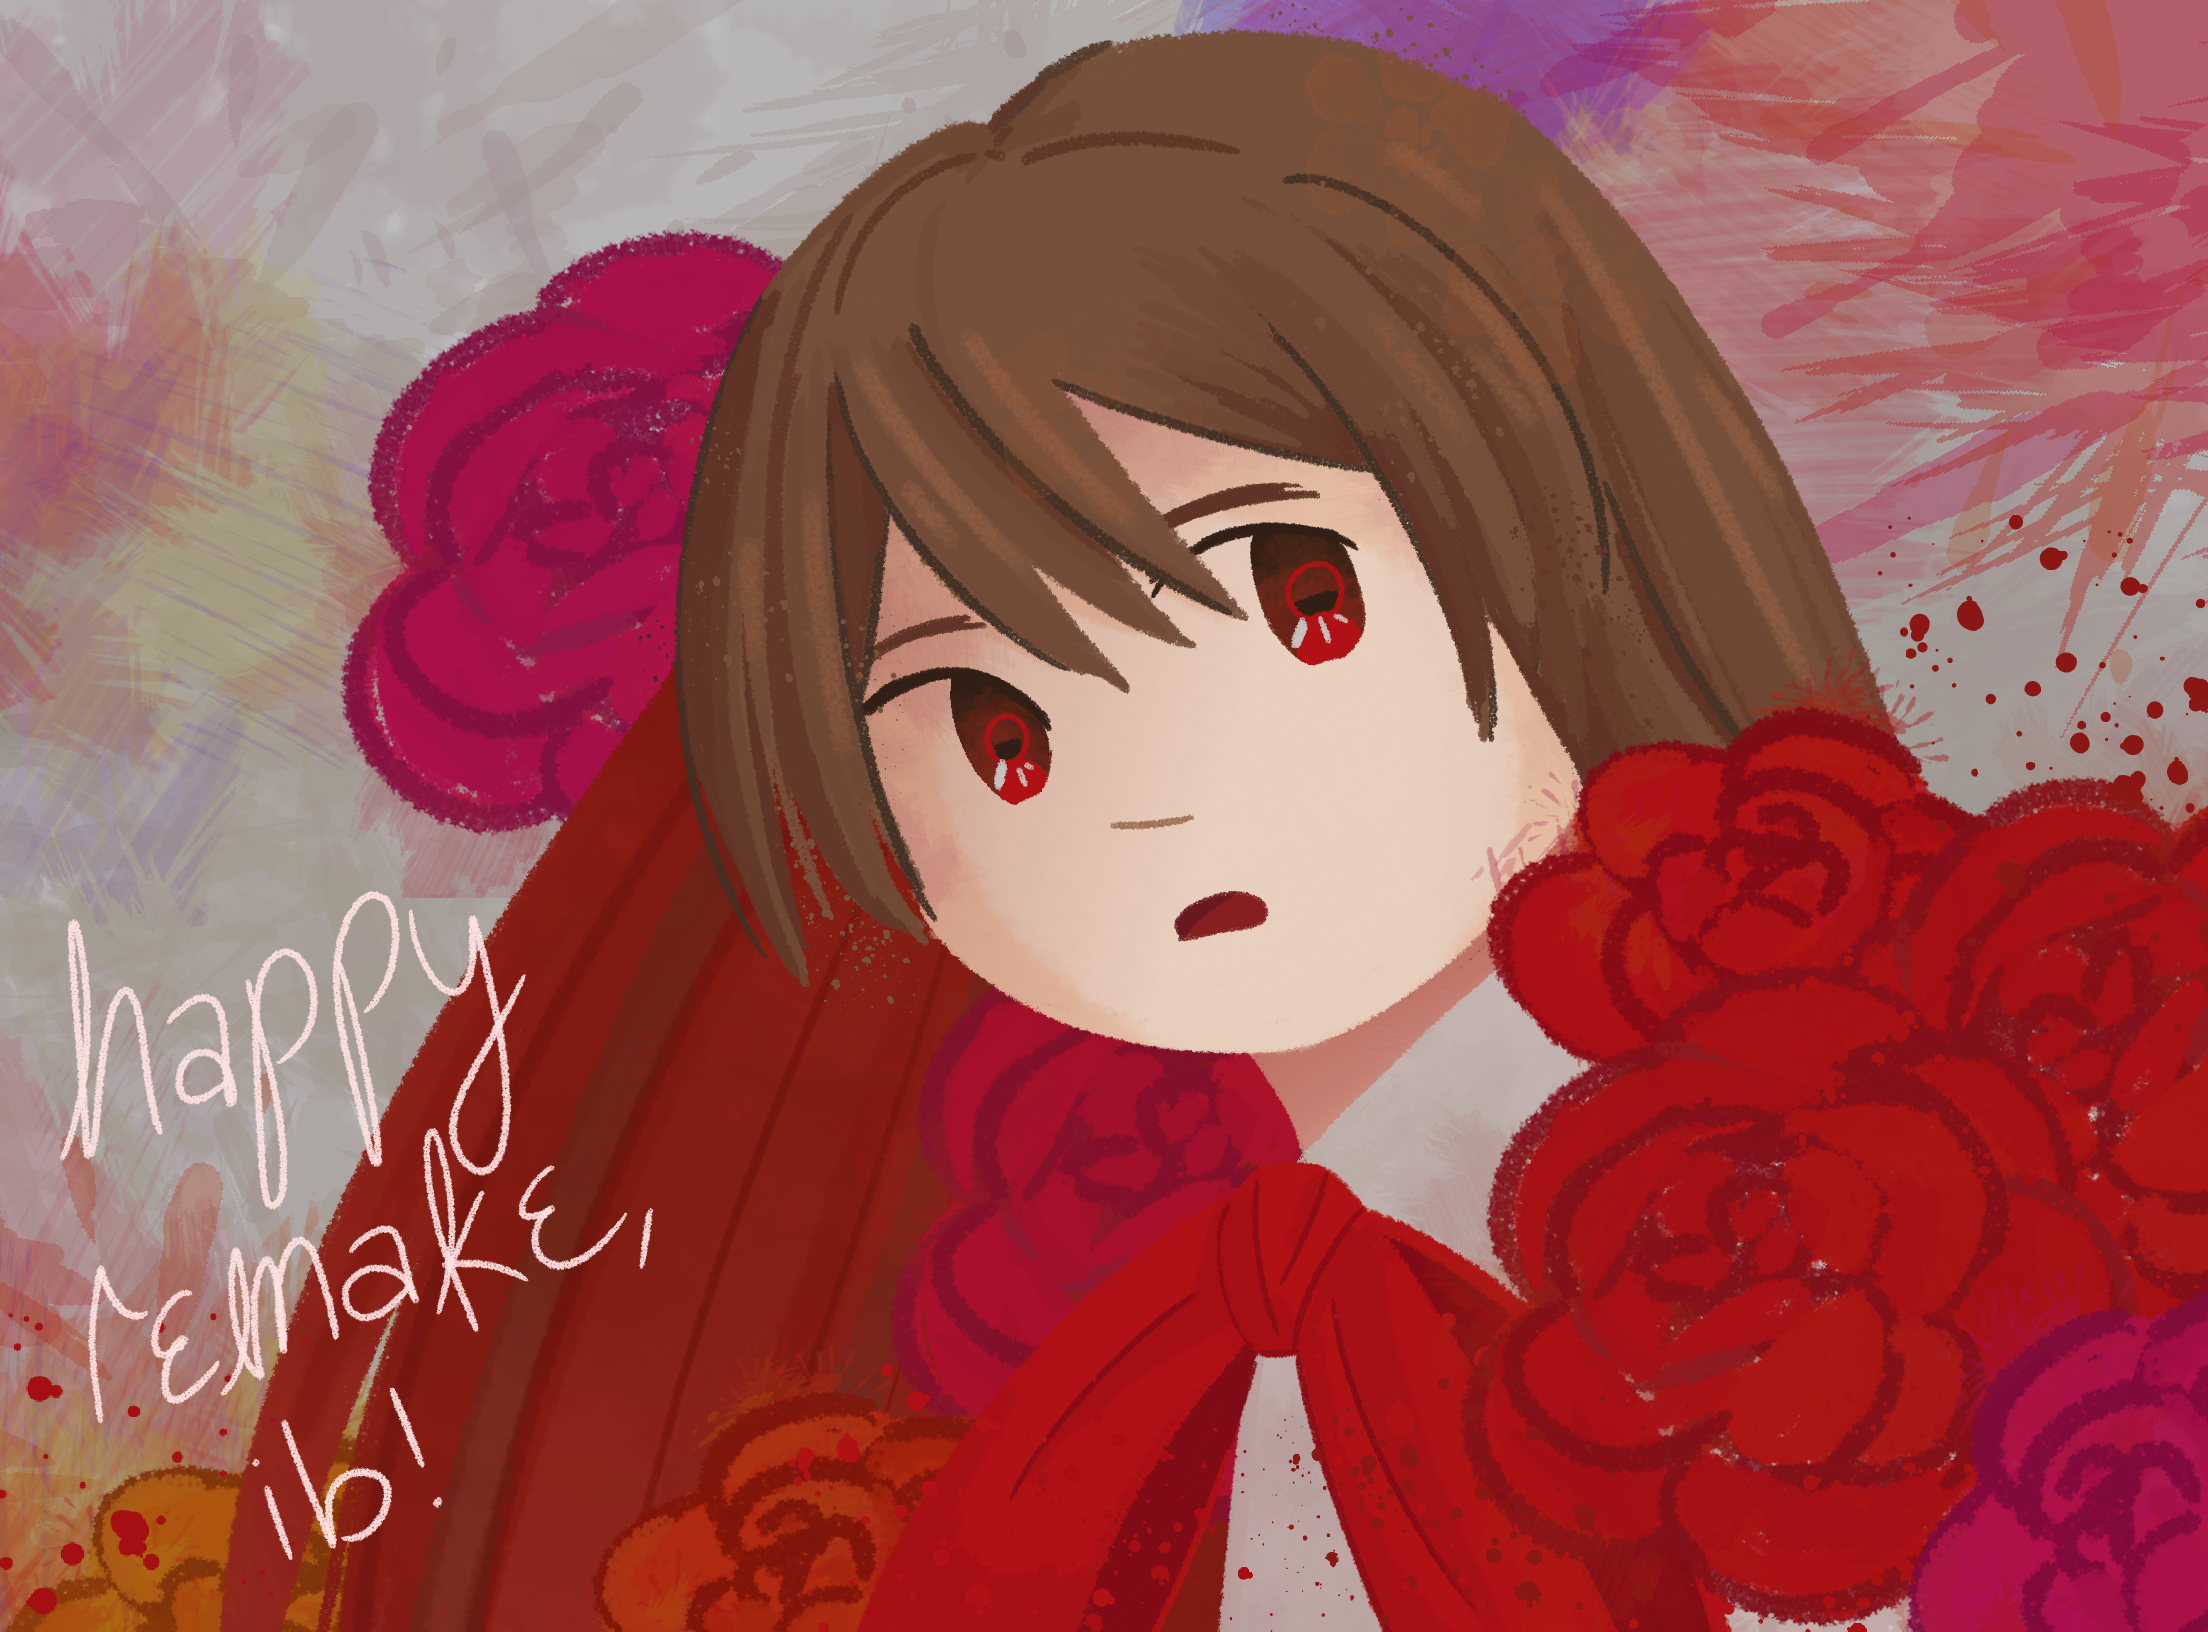 a bust drawing of Ib surrounded by red roses with a grey background covered in paint splatters. handwritten text on the bottom left corner reads 'happy remake, ib!'